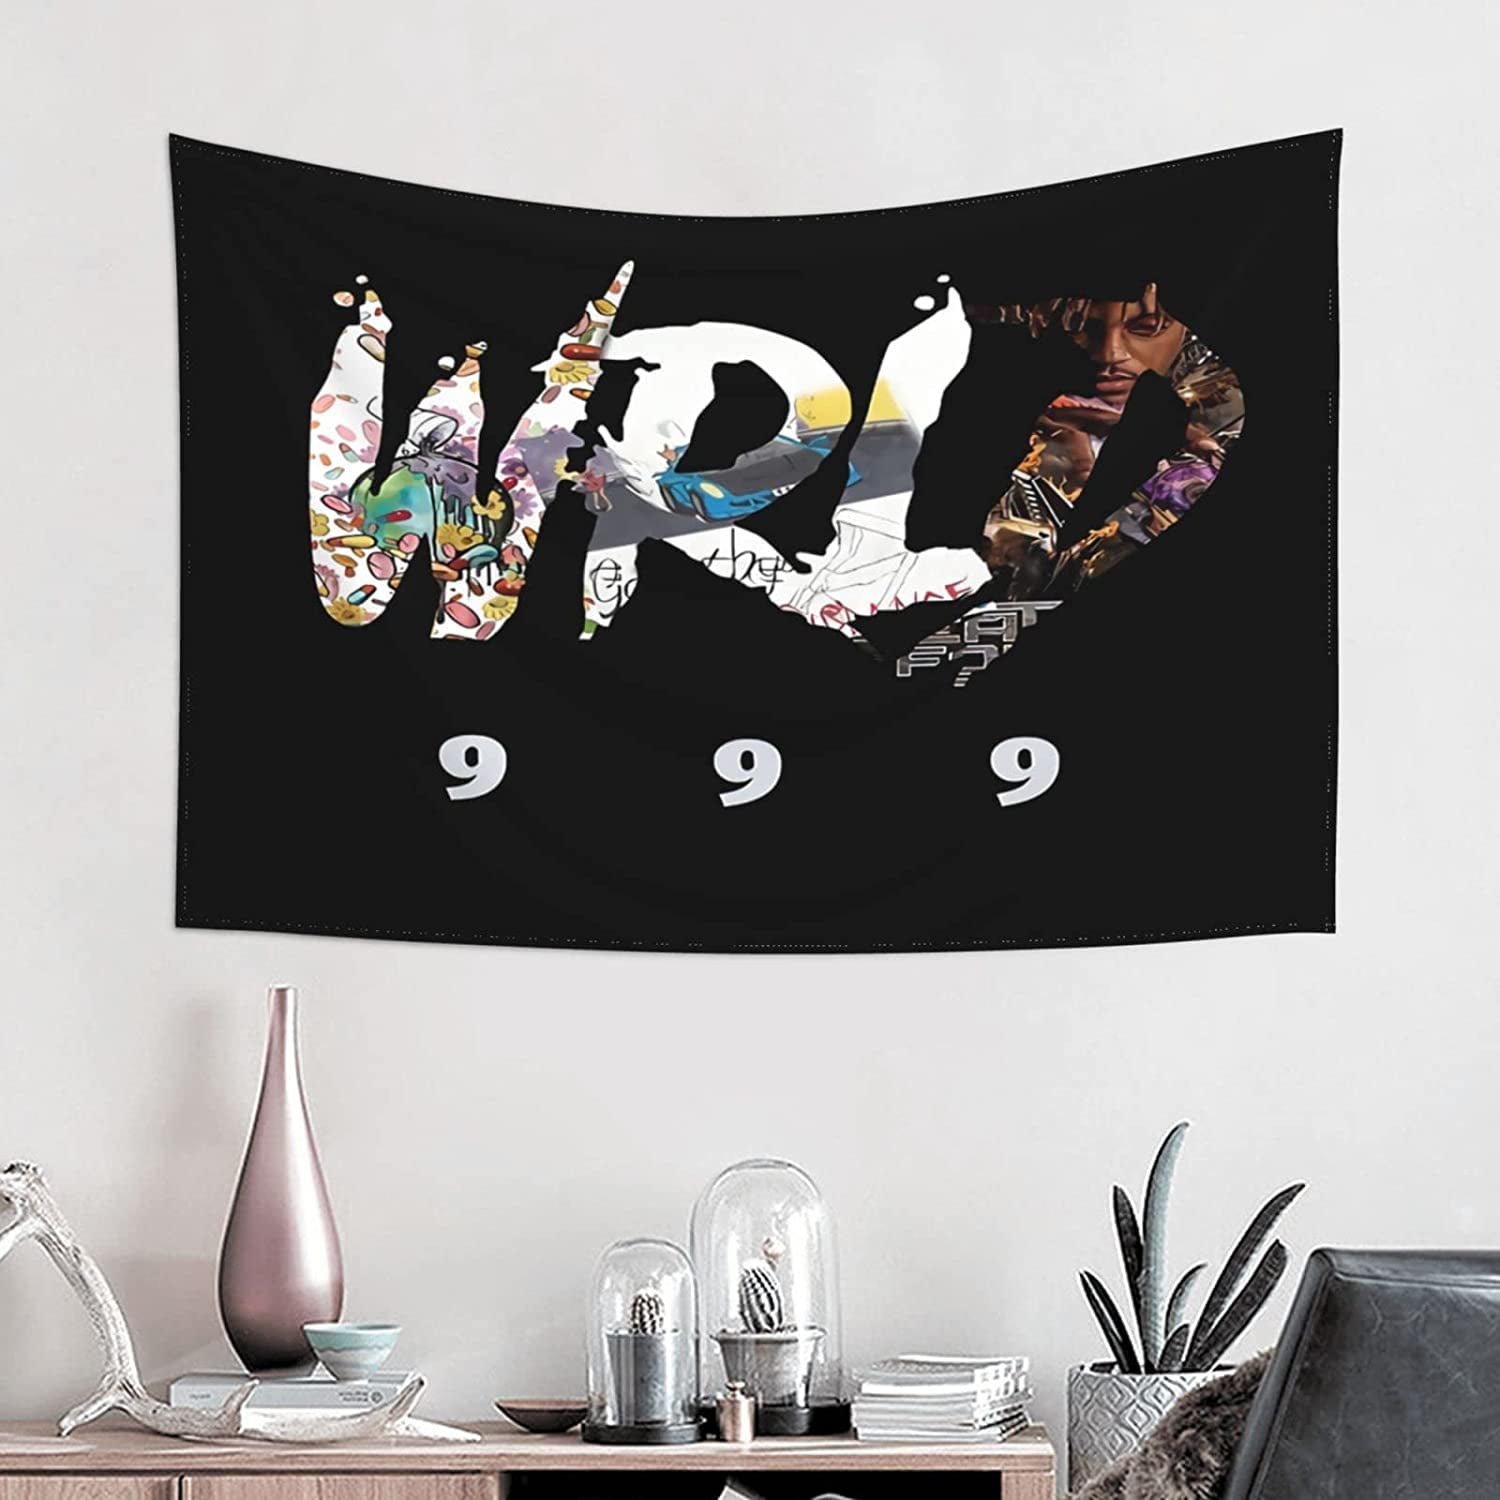 Living Room White 1, 59.1 X 59.1 inch Home Decoration Mural for Bedroom Rapper Tapestry Dorm Art Photo Wall Hanging dfjdfjdjf 698 Lil Peep Tapestry 